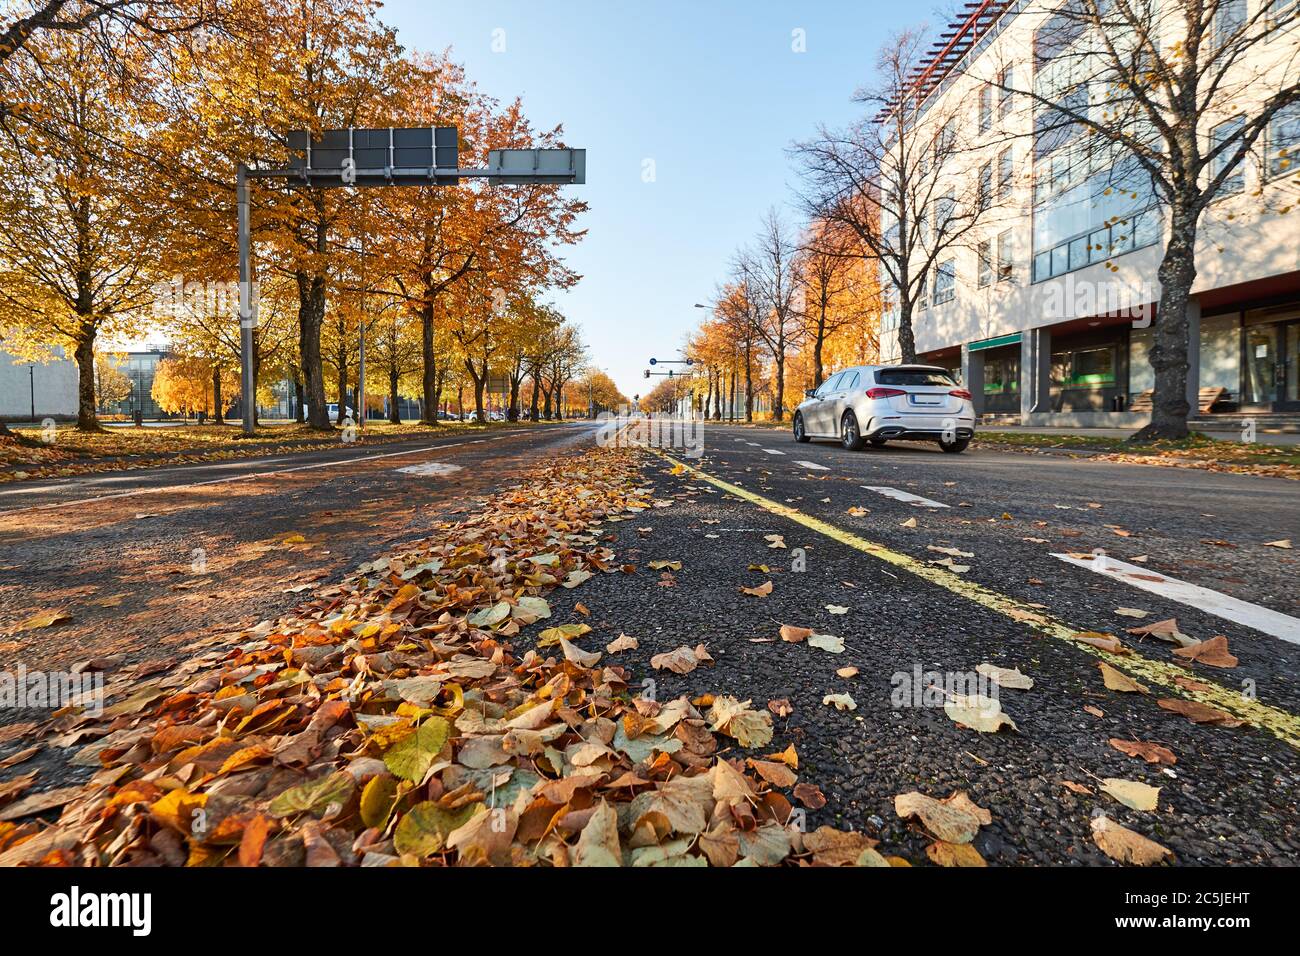 Street with moving car, autumn trees and leaves all around in the center of city. Finland Stock Photo